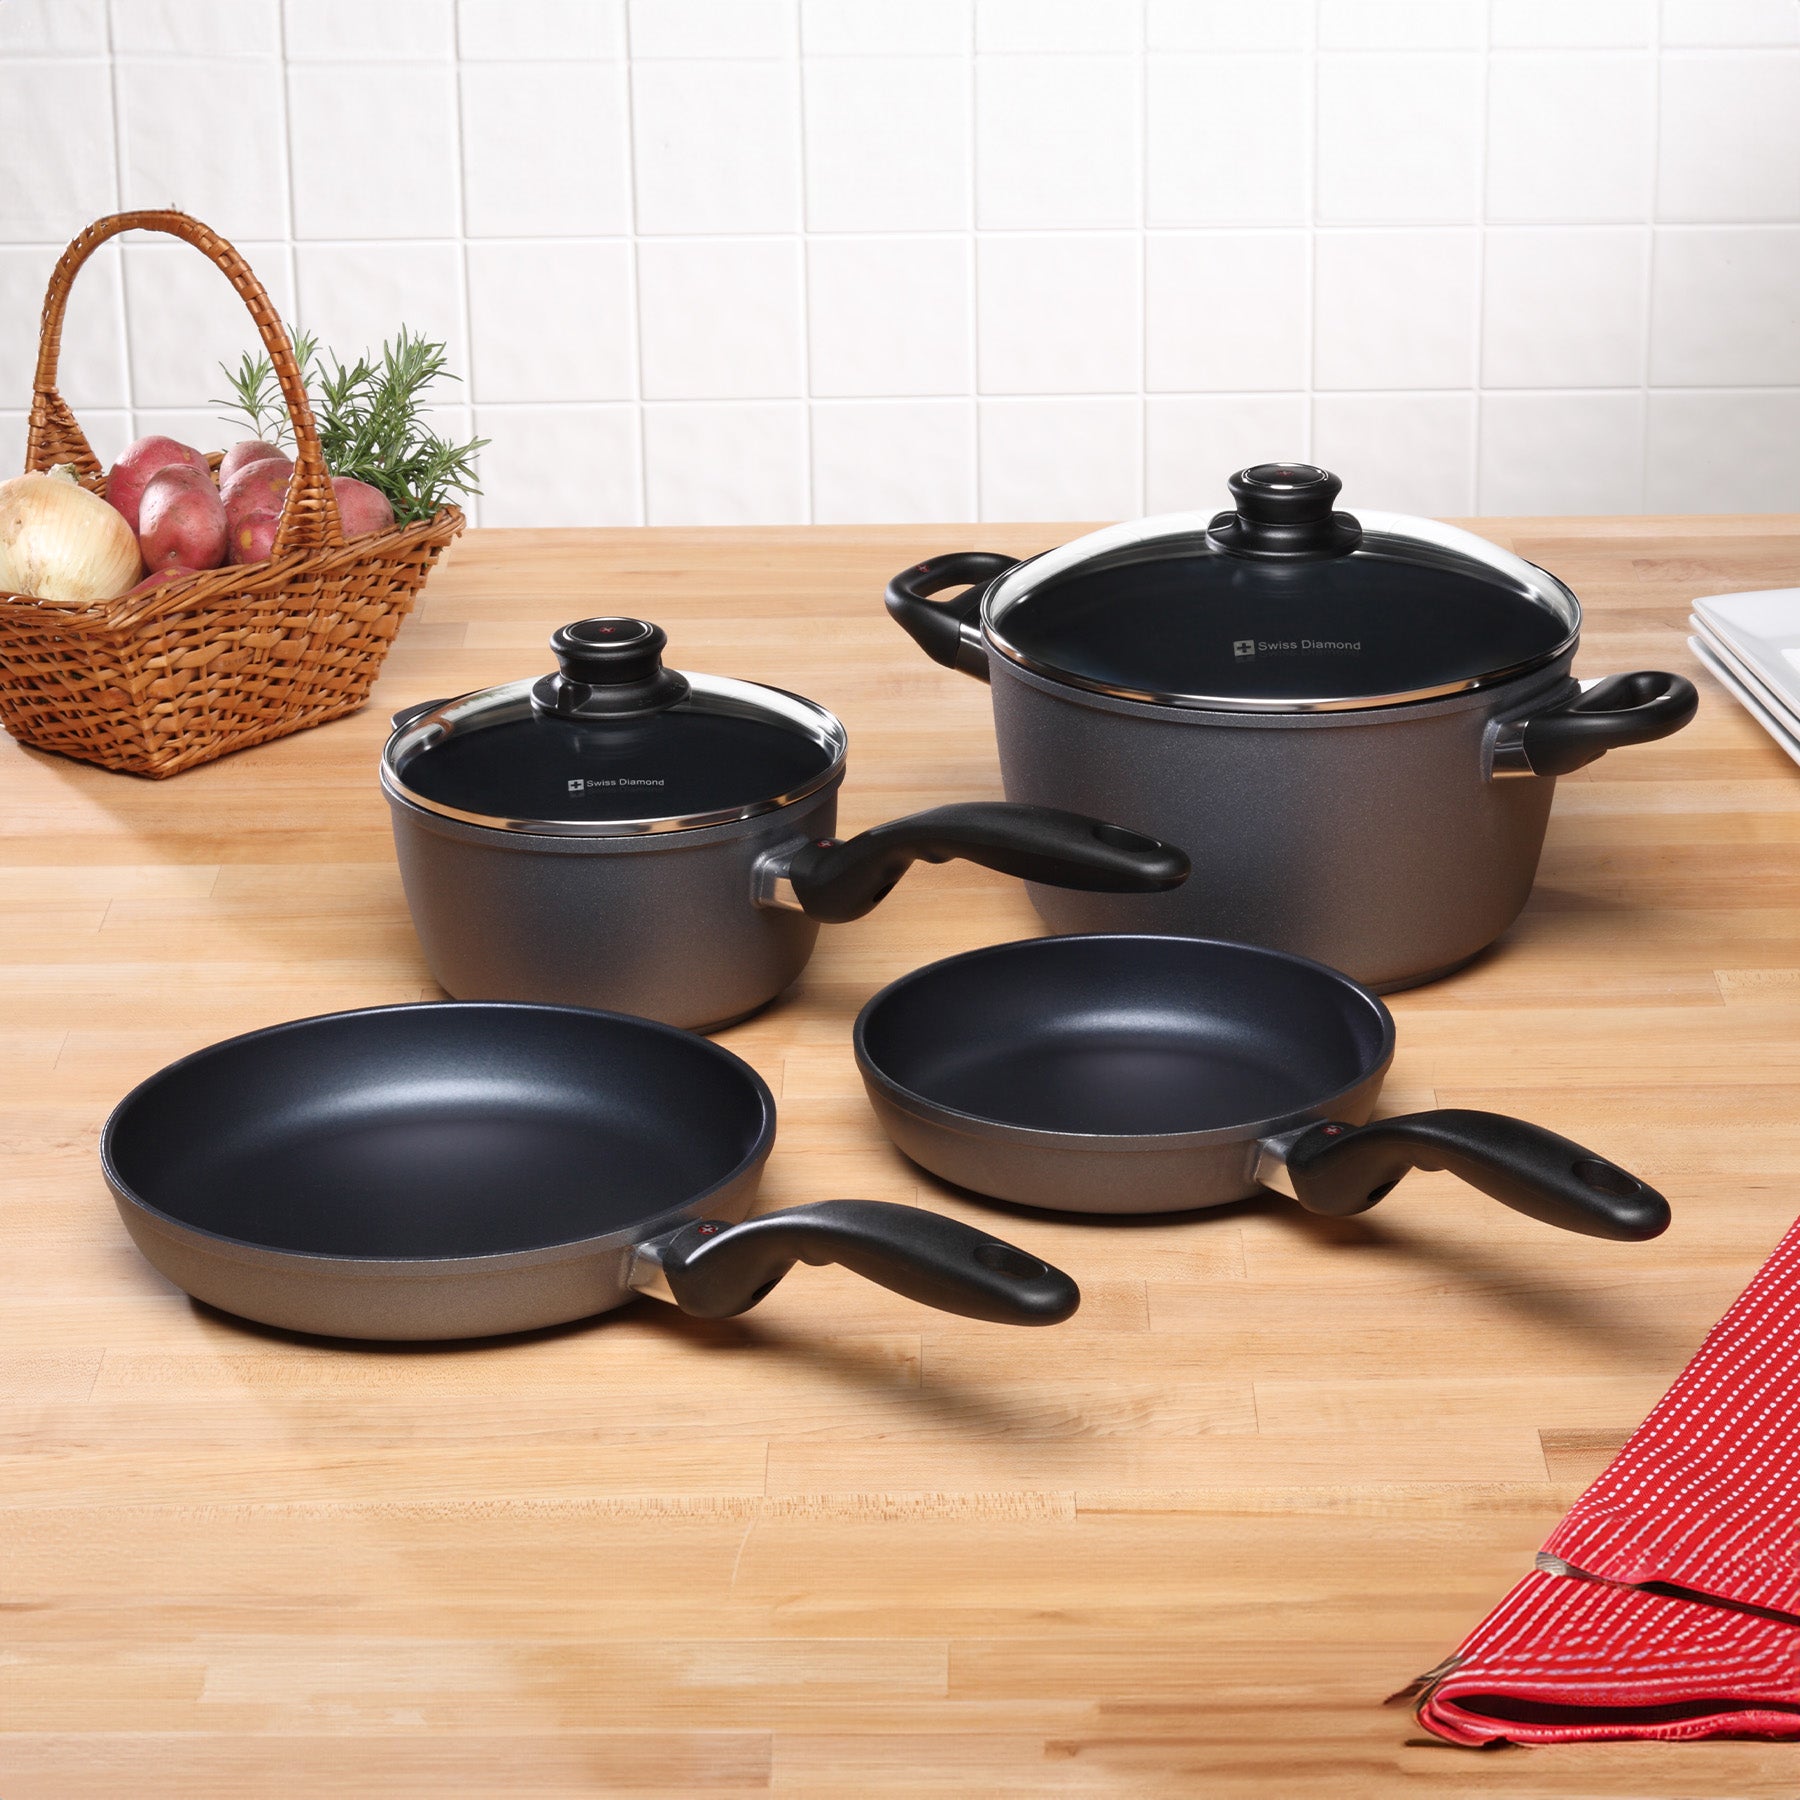 HD Nonstick 6-Piece Set - Newlywed Kitchen Kit in use on kitchen counter